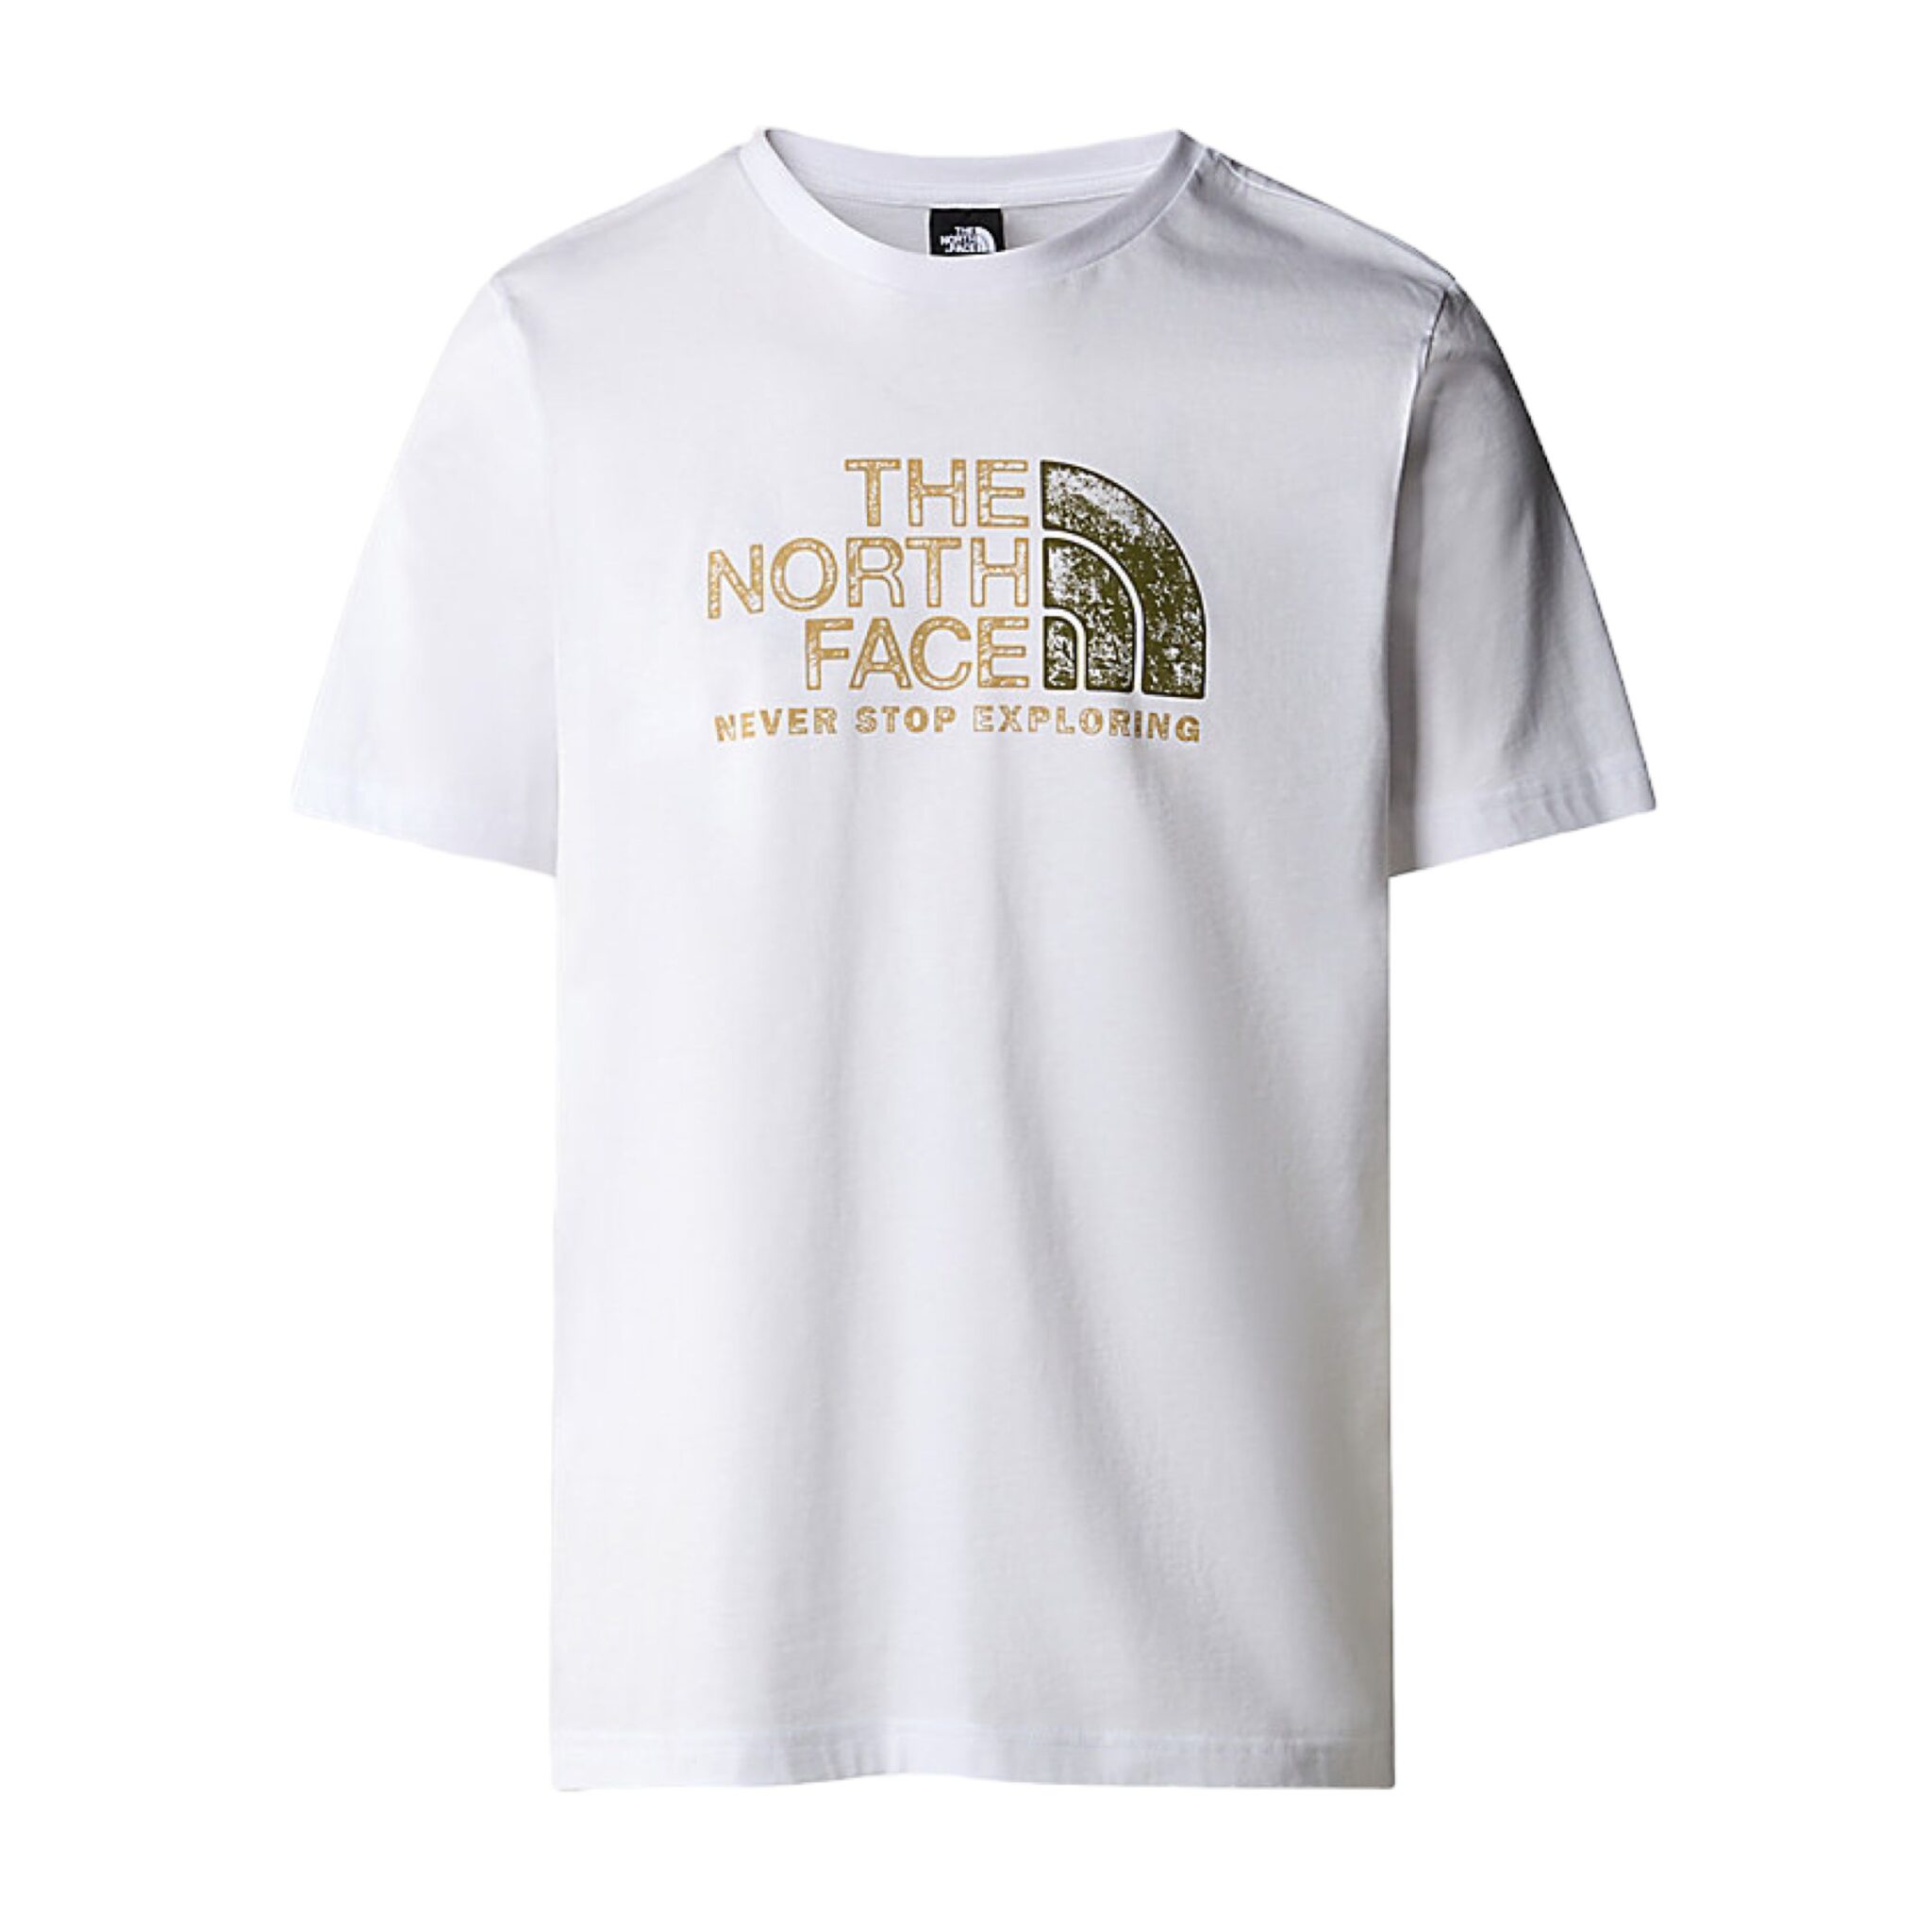 THE NORTH FACE – T-SHIRT RUST 2 WHITE